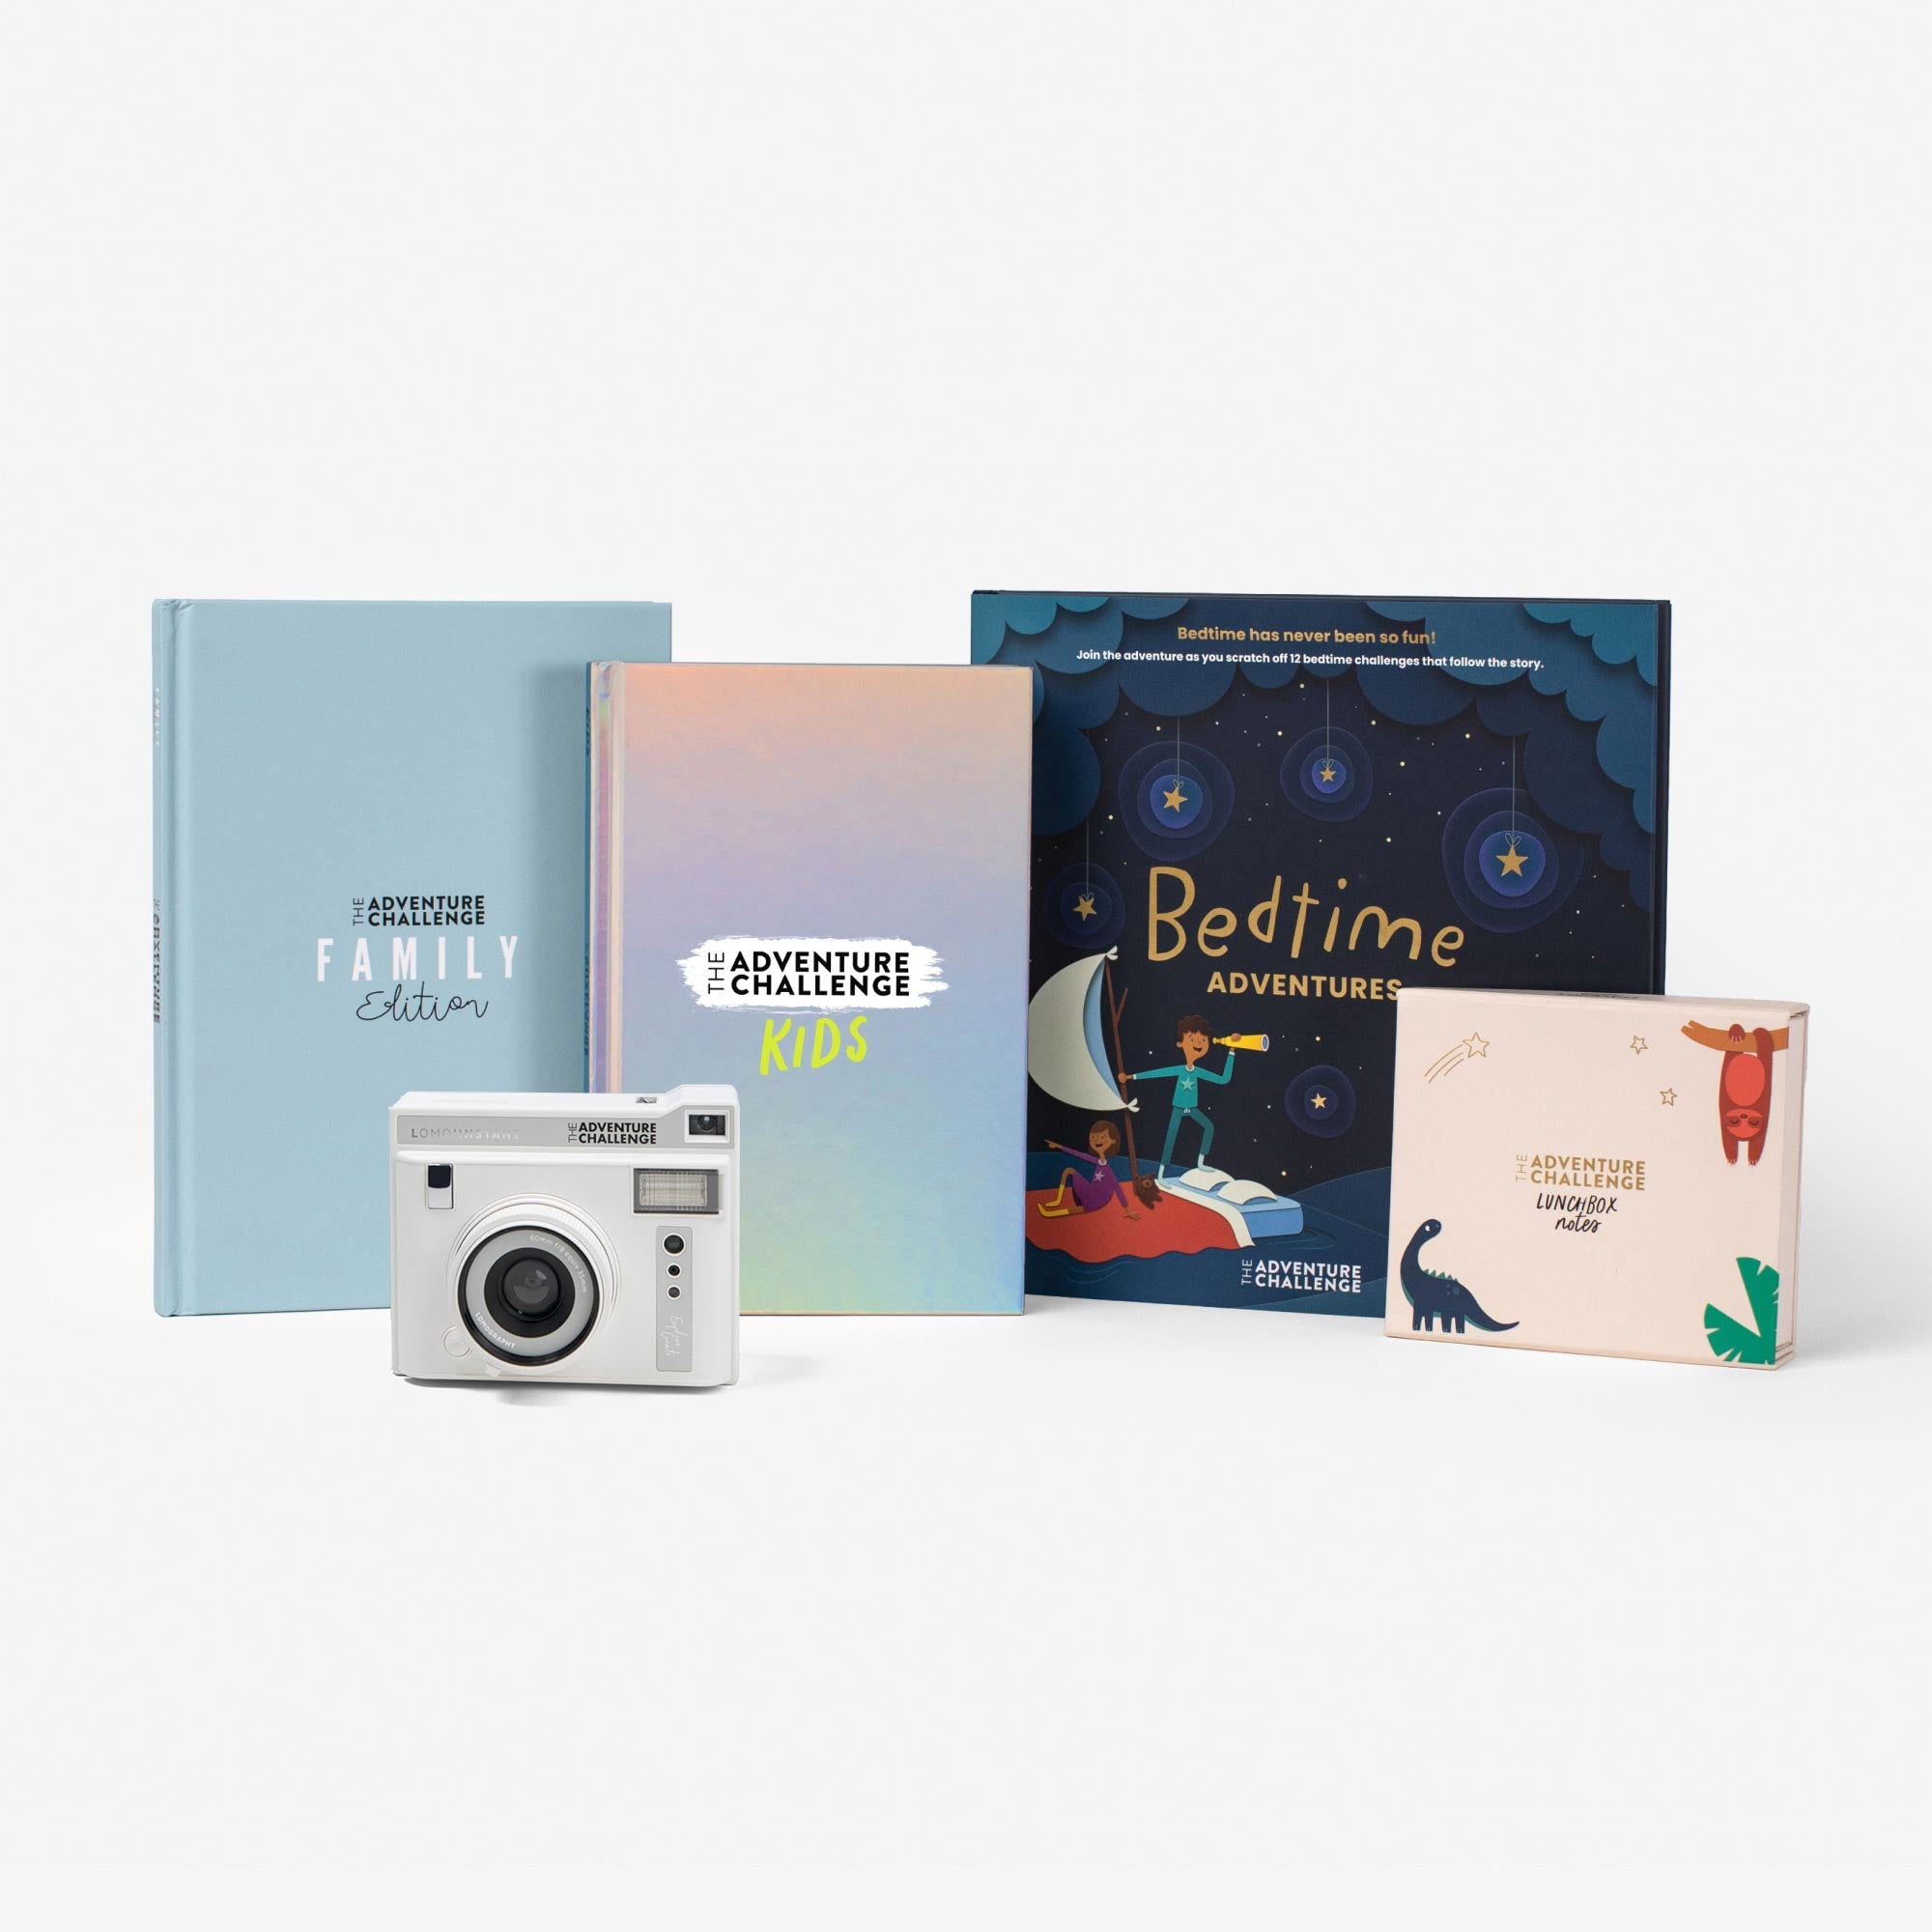 Quickies and Couples Camera Bundle – The Adventure Challenge